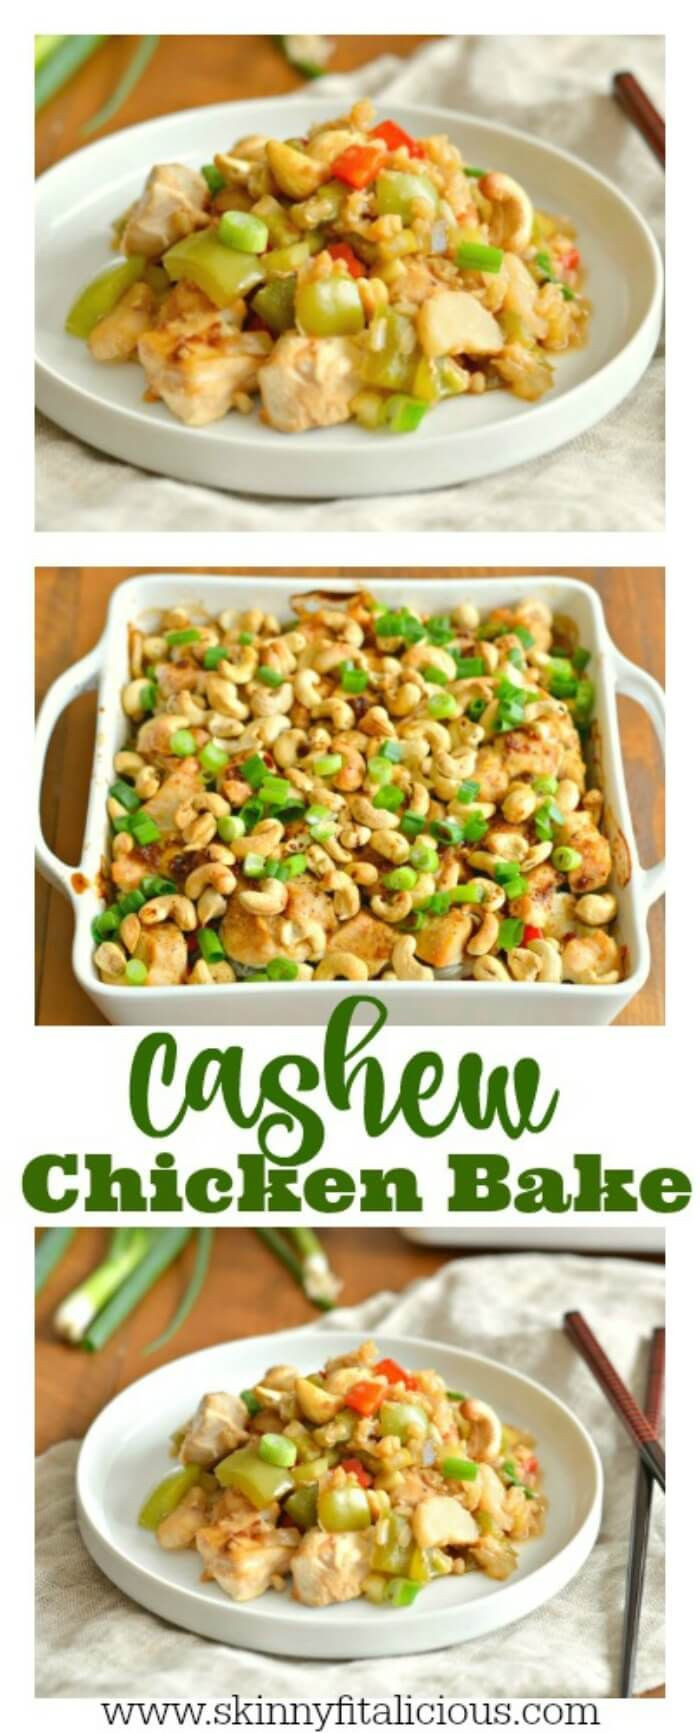 Low Calorie Dinners For Family
 100 Low Calorie Recipes on Pinterest